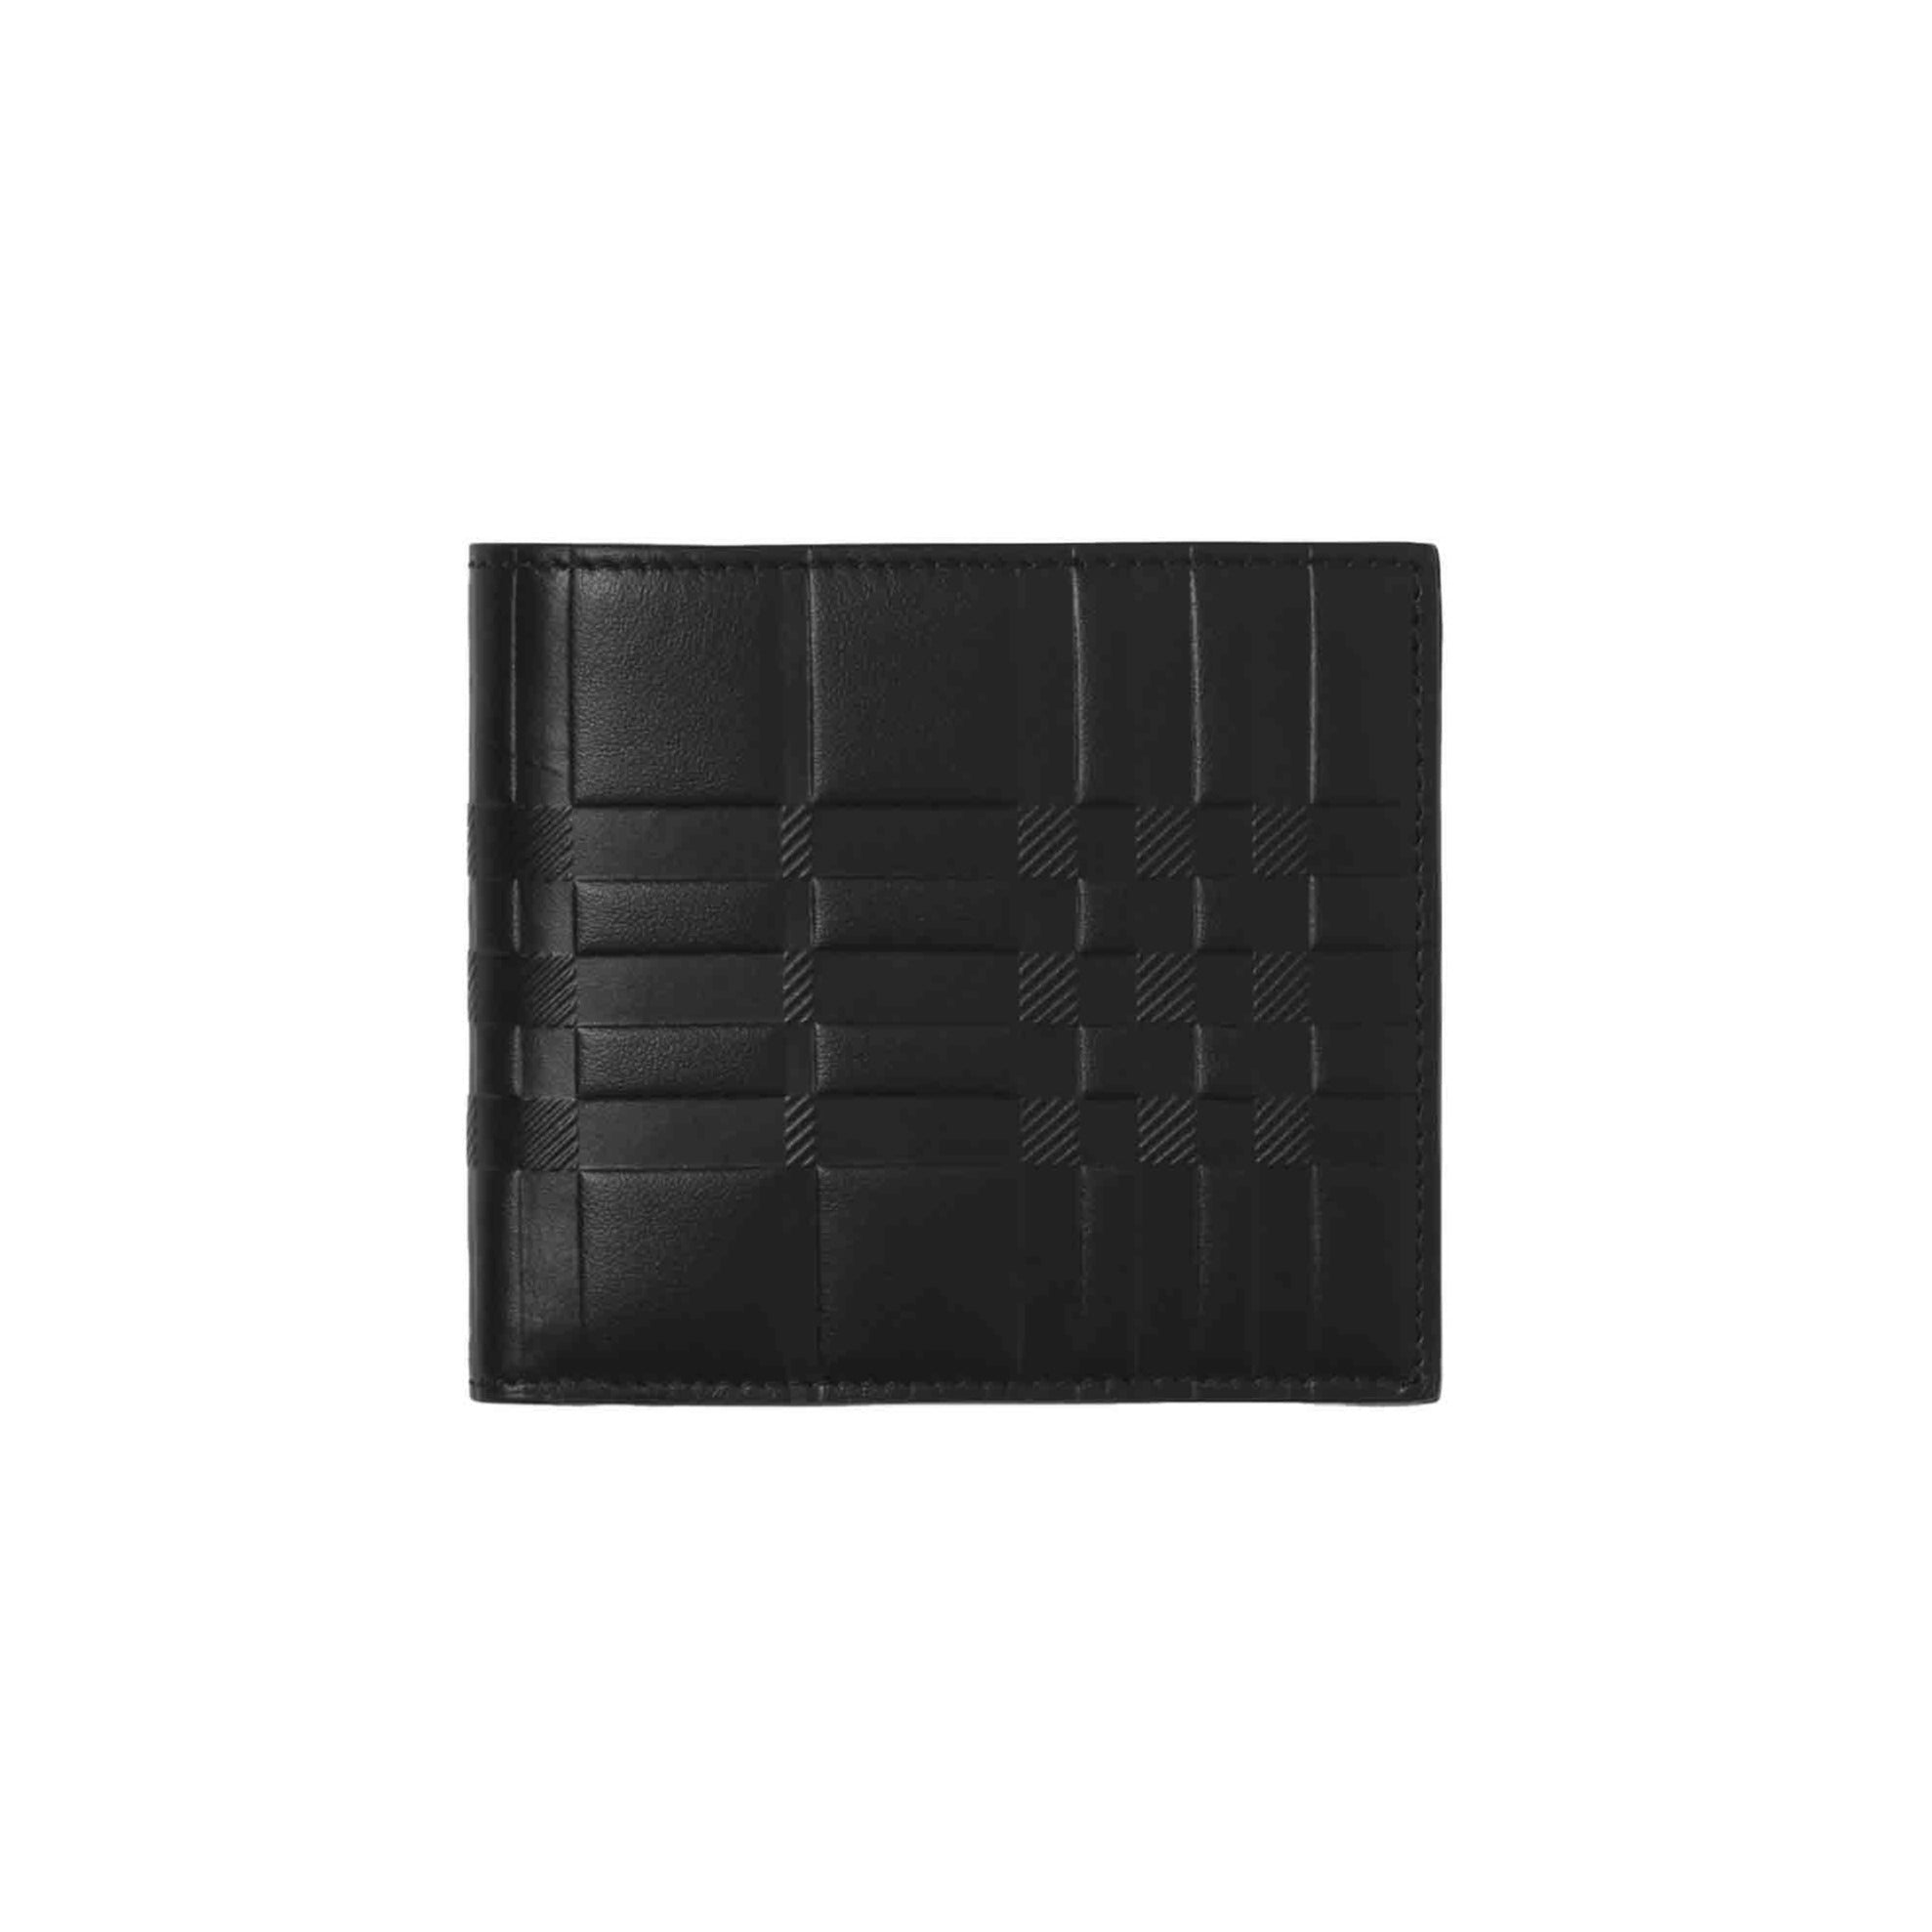 Burberry Embossed Check Leather Wallet